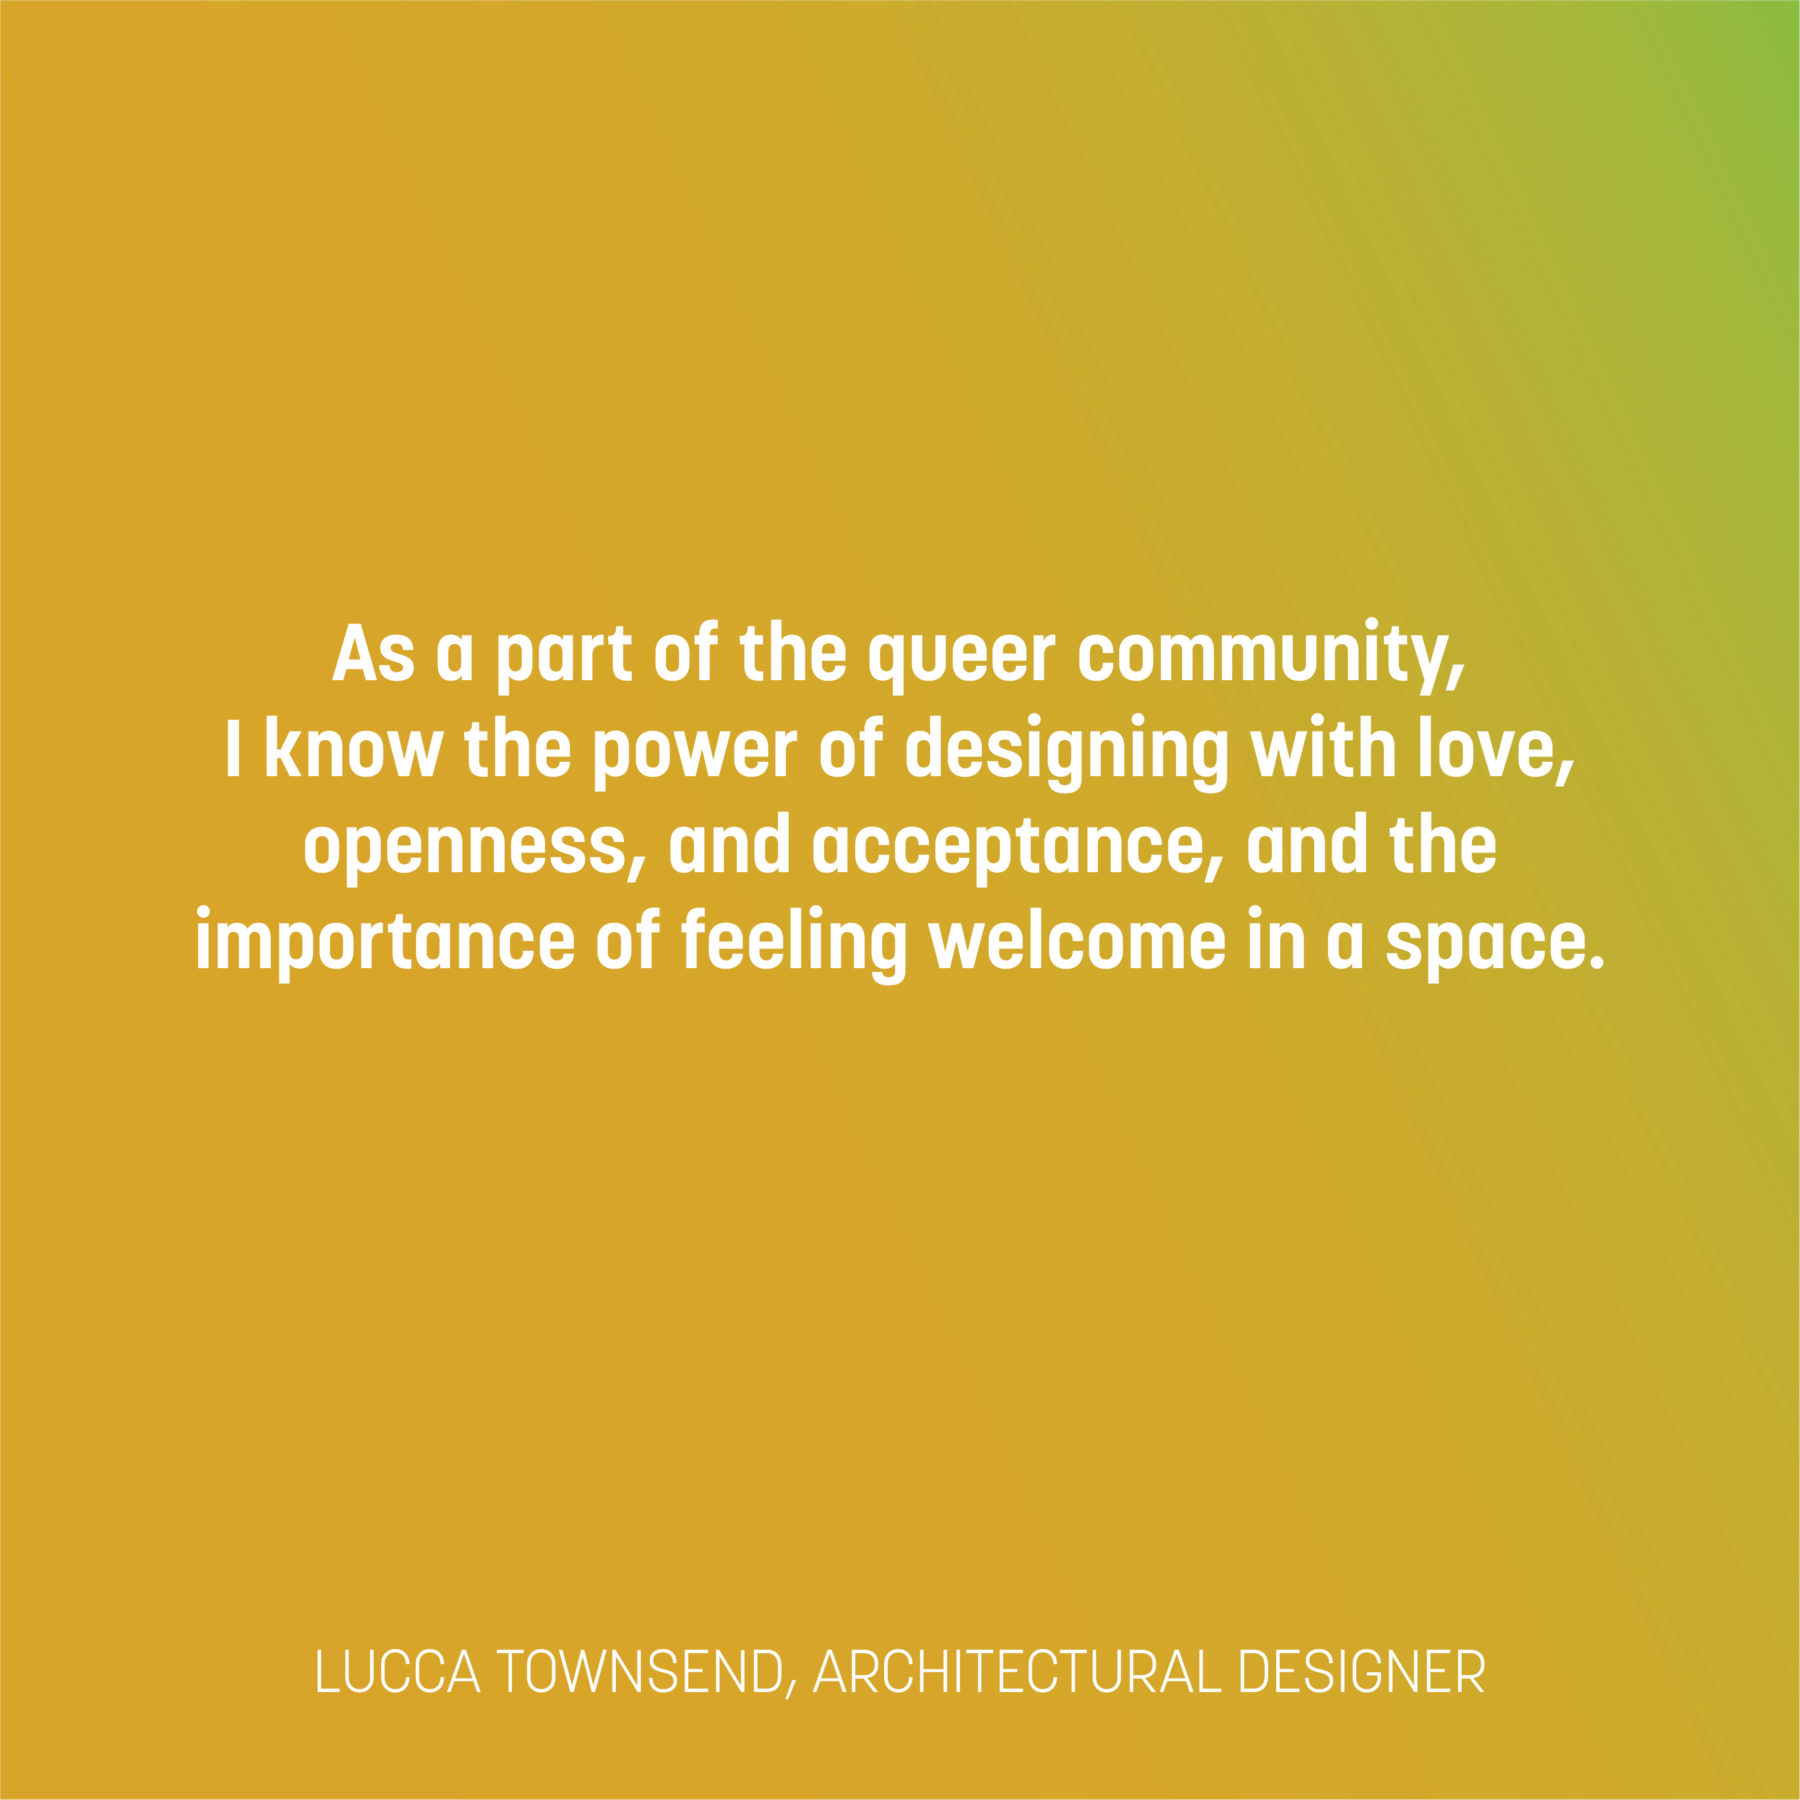 Text on a yellow to green gradient reads: As a part of the queer community, I know the power of designing with love, openness, and acceptance, and the importance of feeling welcome in a space. -Lucca Townsend, architectural designer